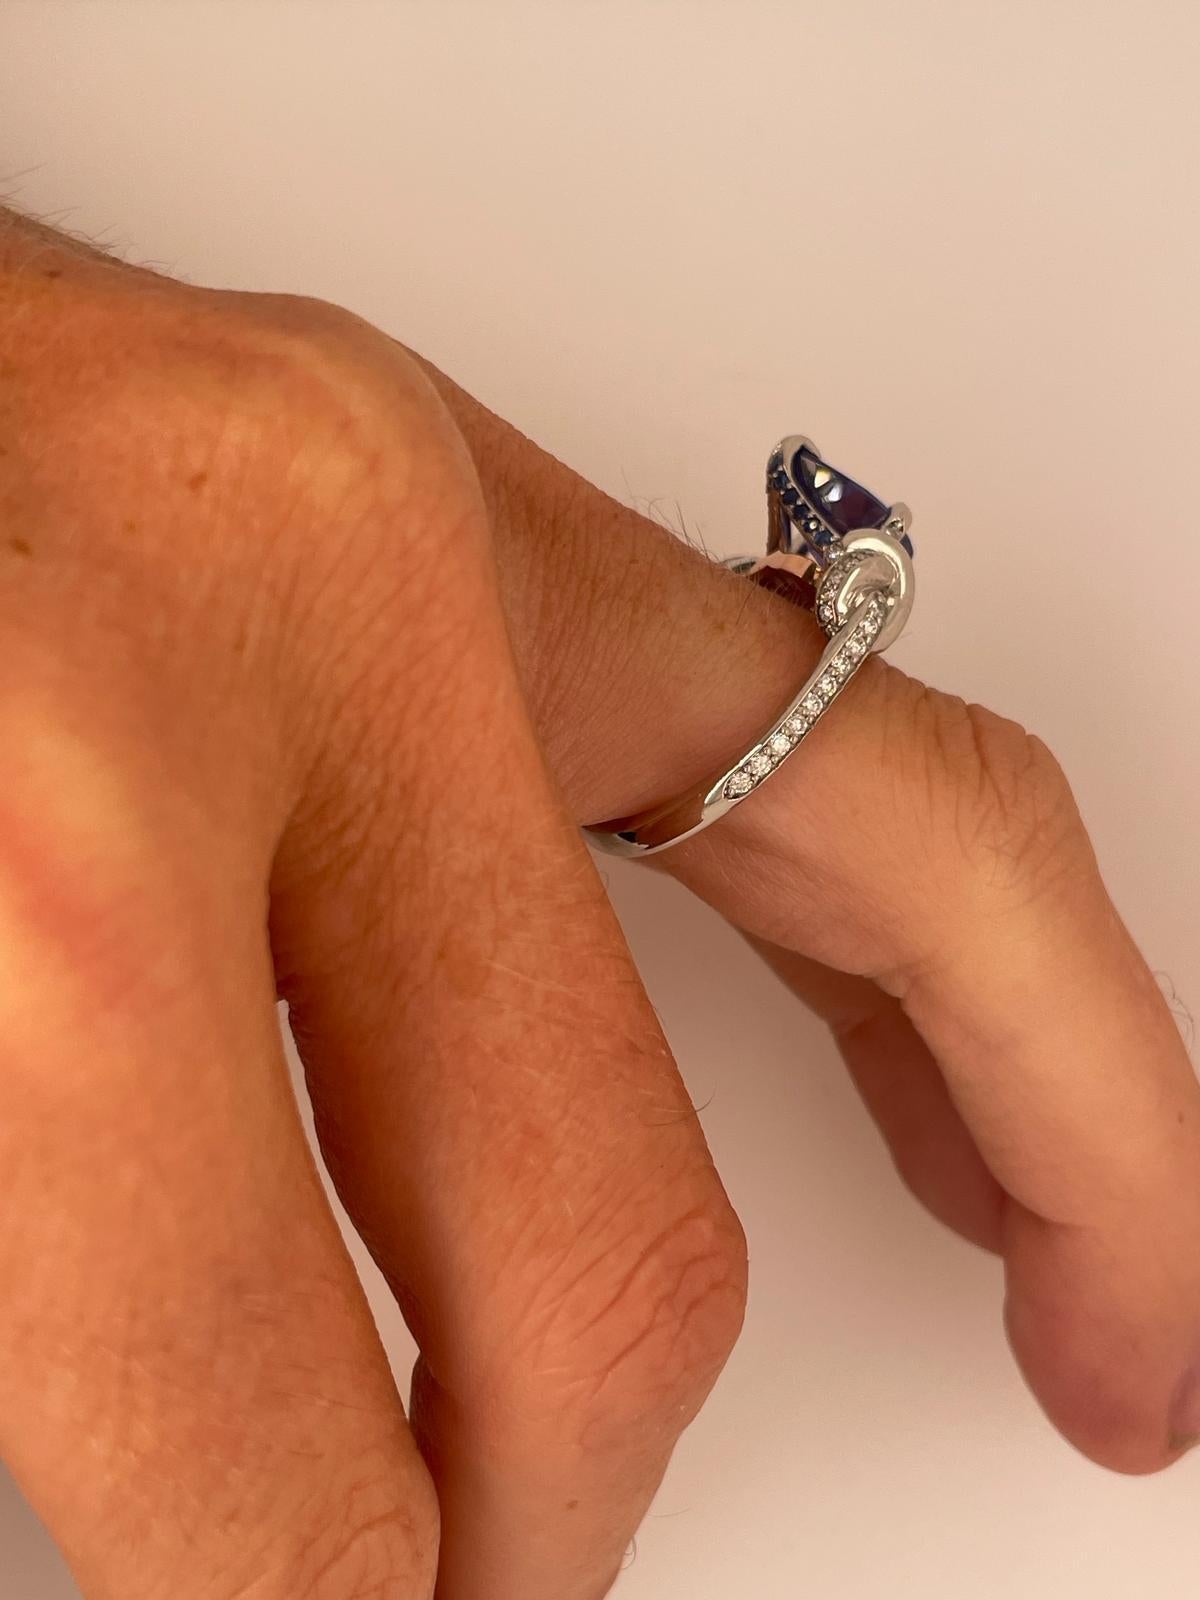 For Sale:  2ct tanzanite and diamond ring in platinum and rose gold  Forget me knot ring  20